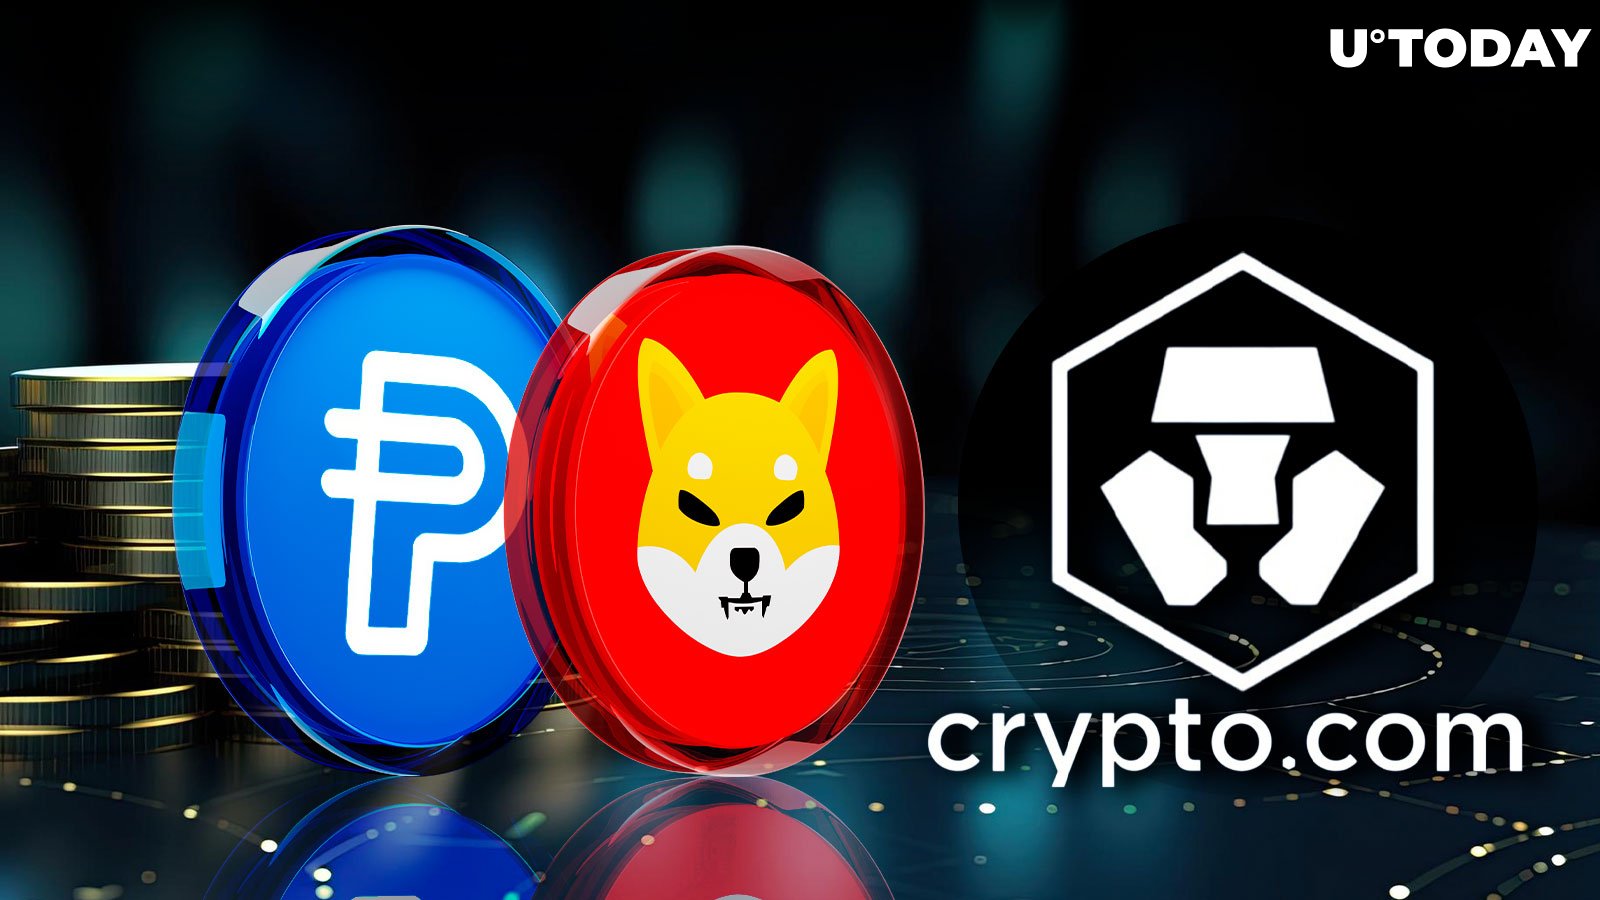 Shiba Inu (SHIB) and Other Coins Can Now Be Traded Against PayPal's PYUSD Stablecoin on Crypto.com